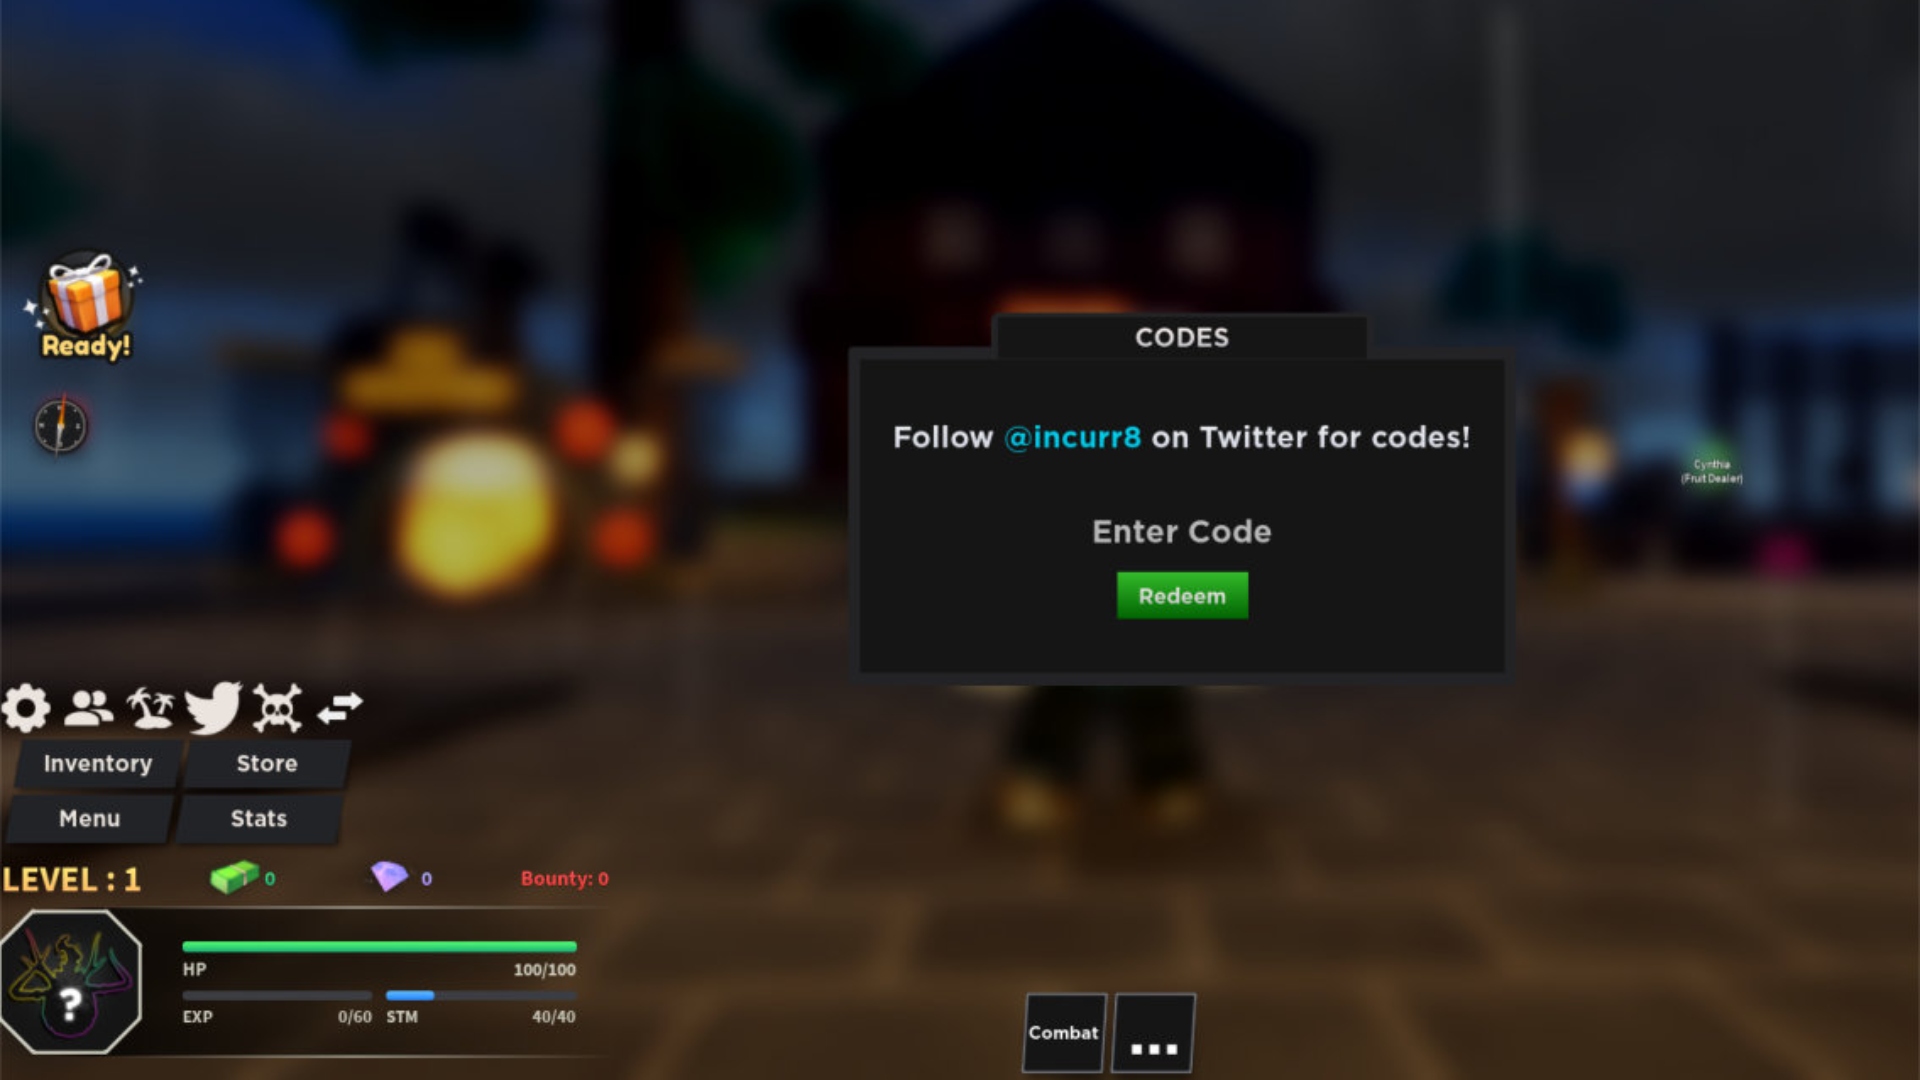 NEW* ALL WORKING UPDATE CODES FOR SEA PIECE NOVEMBER 2022! ROBLOX SEA PIECE  CODES 